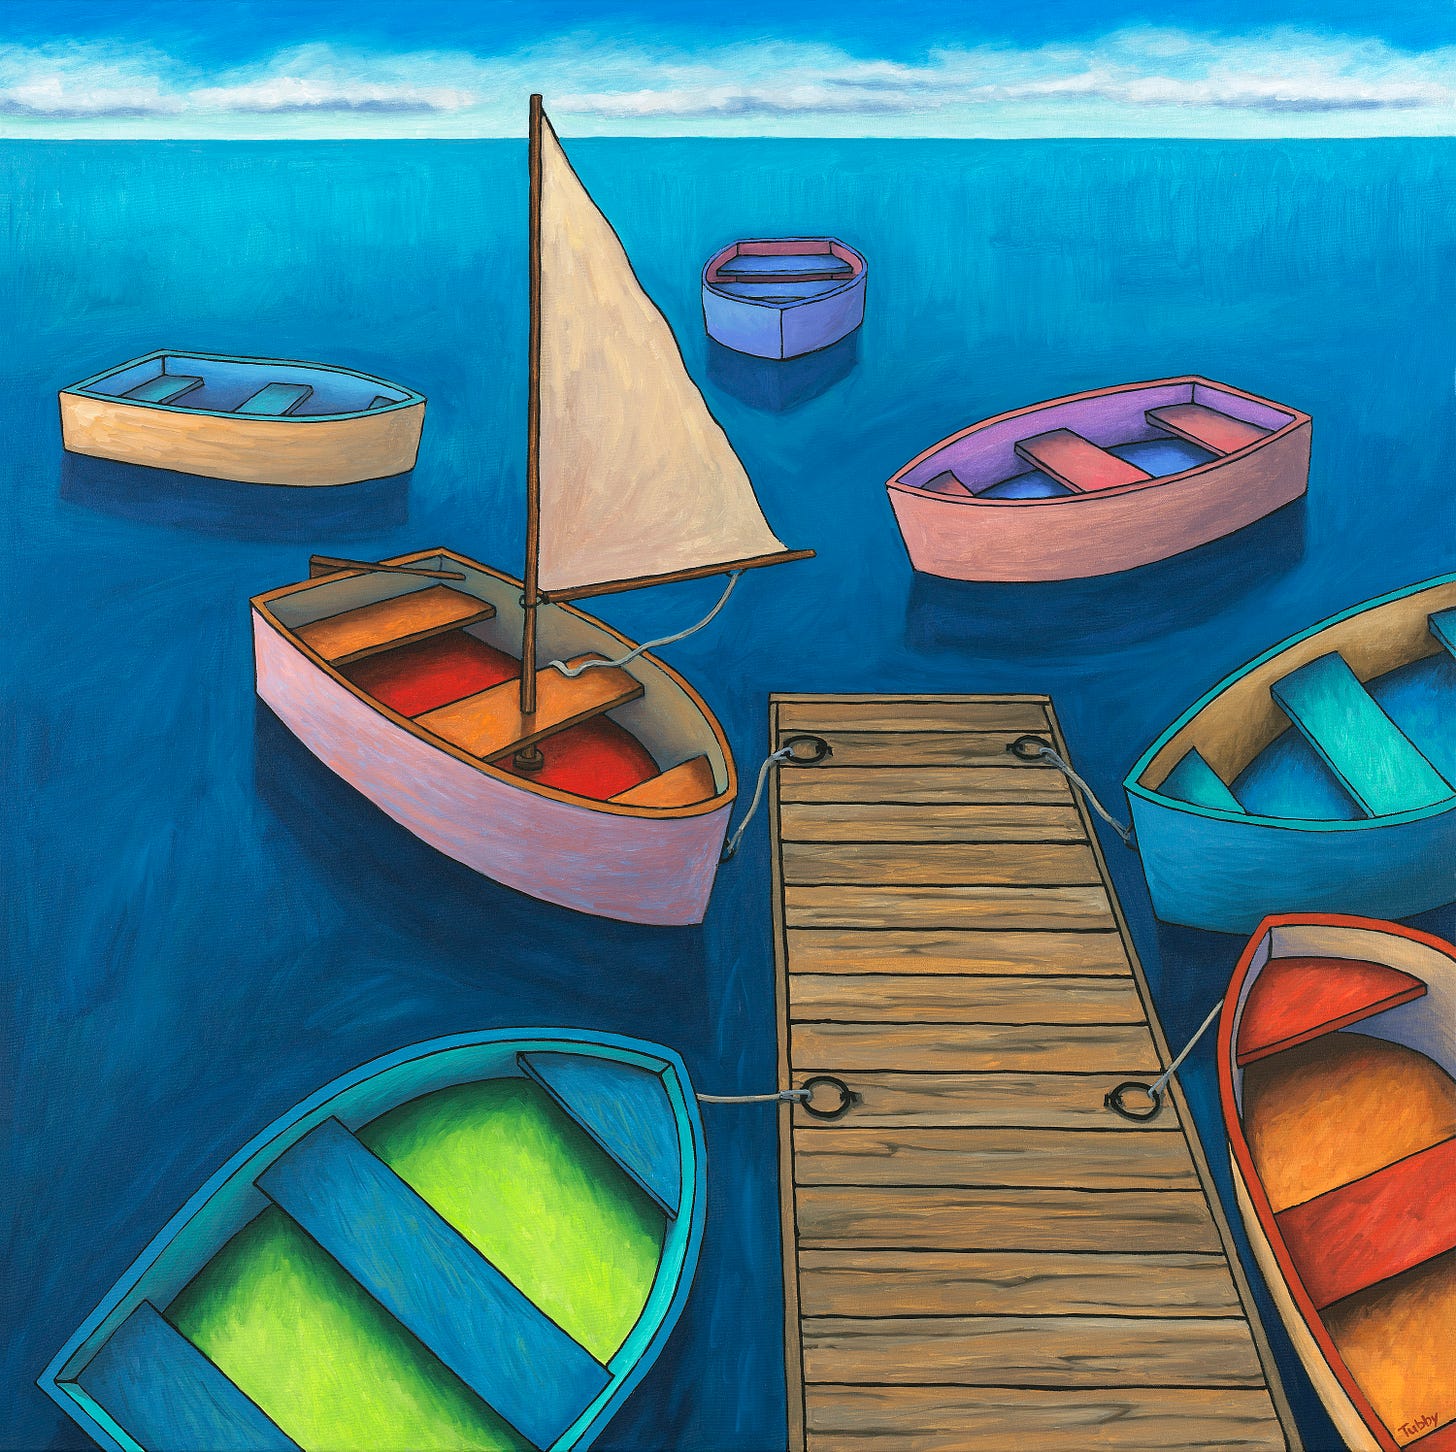 A painting of boats on water

Description automatically generated